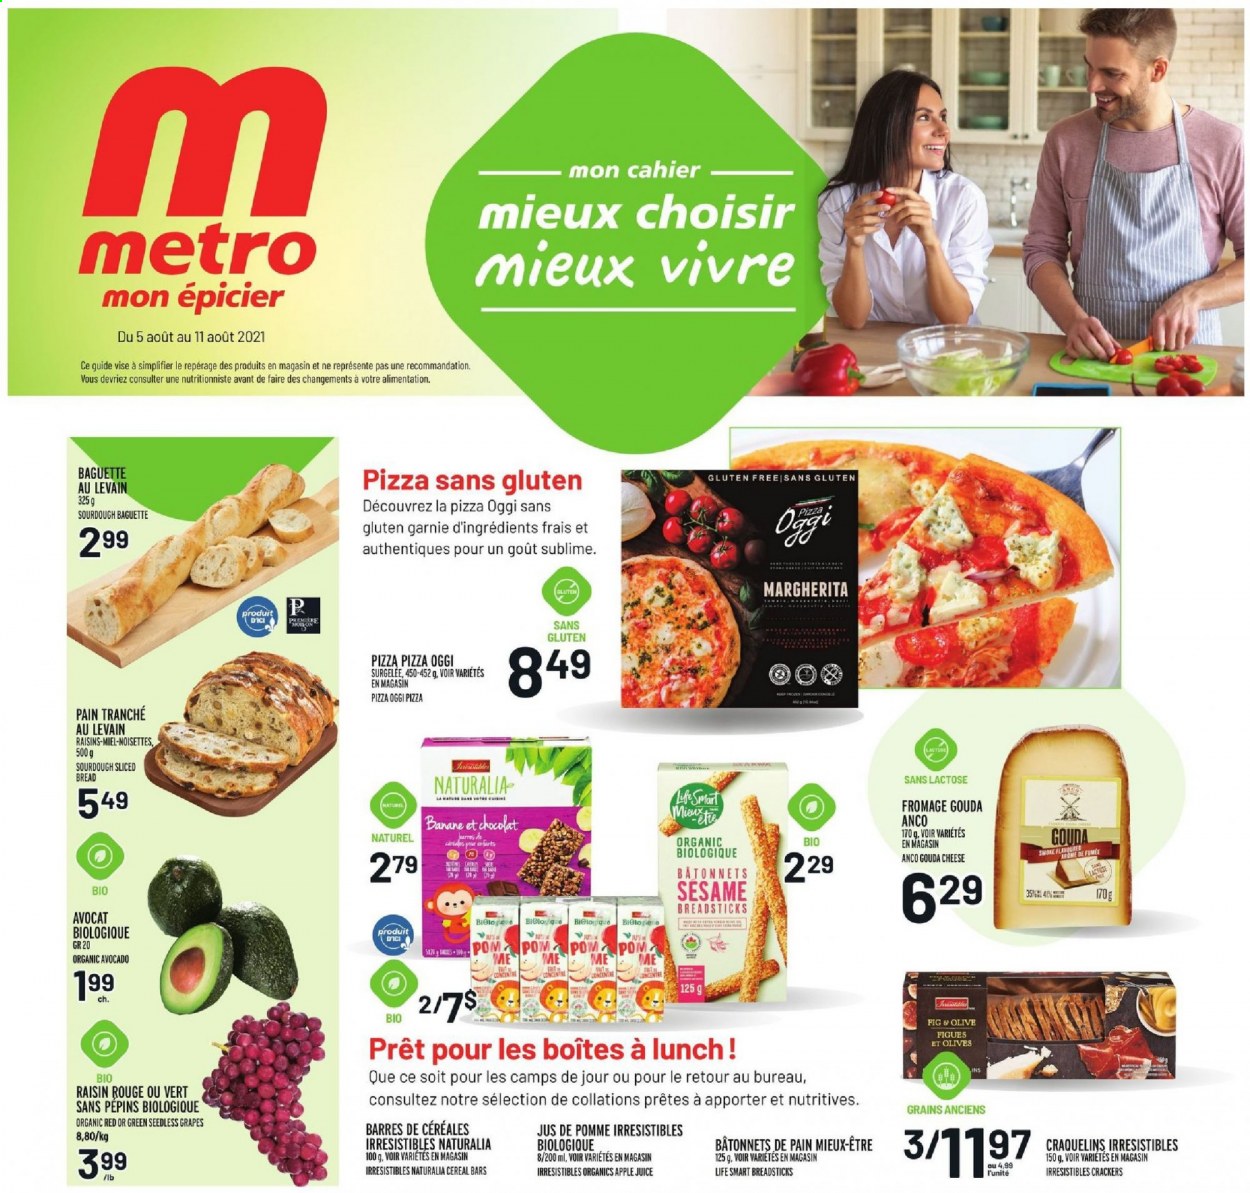 thumbnail - Metro Flyer - August 05, 2021 - August 11, 2021 - Sales products - avocado, grapes, seedless grapes, pizza, gouda, cereal bar, crackers, bread sticks, cereals, dried fruit, apple juice, juice, raisins, olives. Page 1.